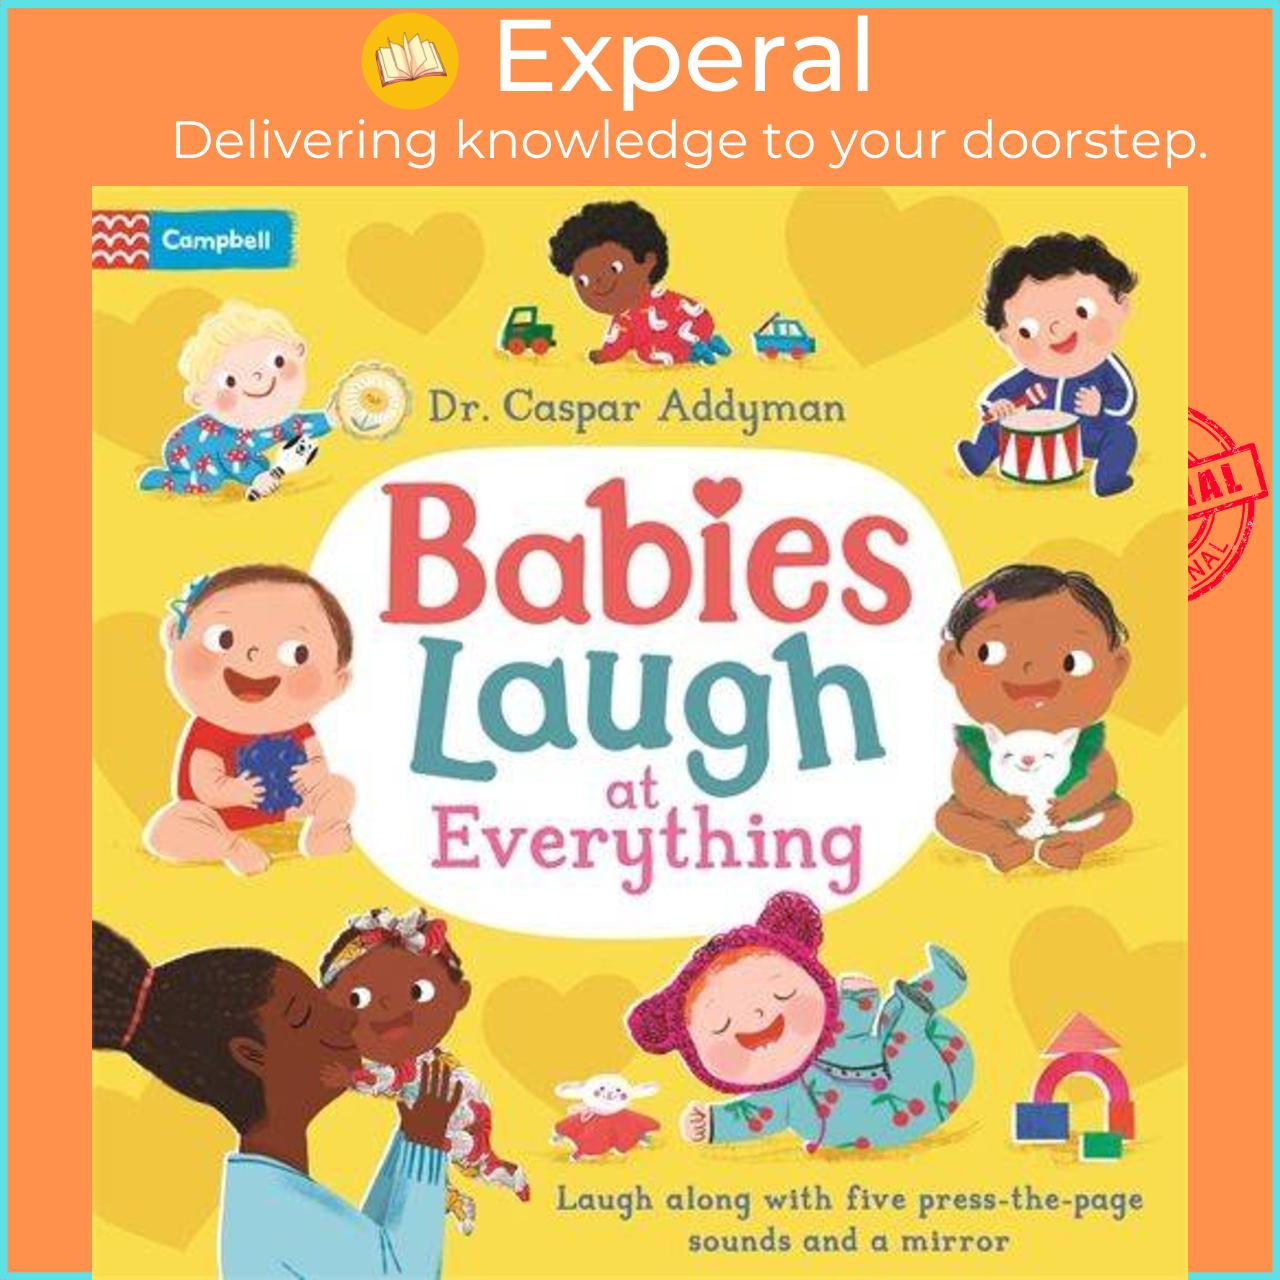 Sách - Babies Laugh at Everything - A Press-the-page Sound Book with Mirror by Ania Simeone (UK edition, boardbook)